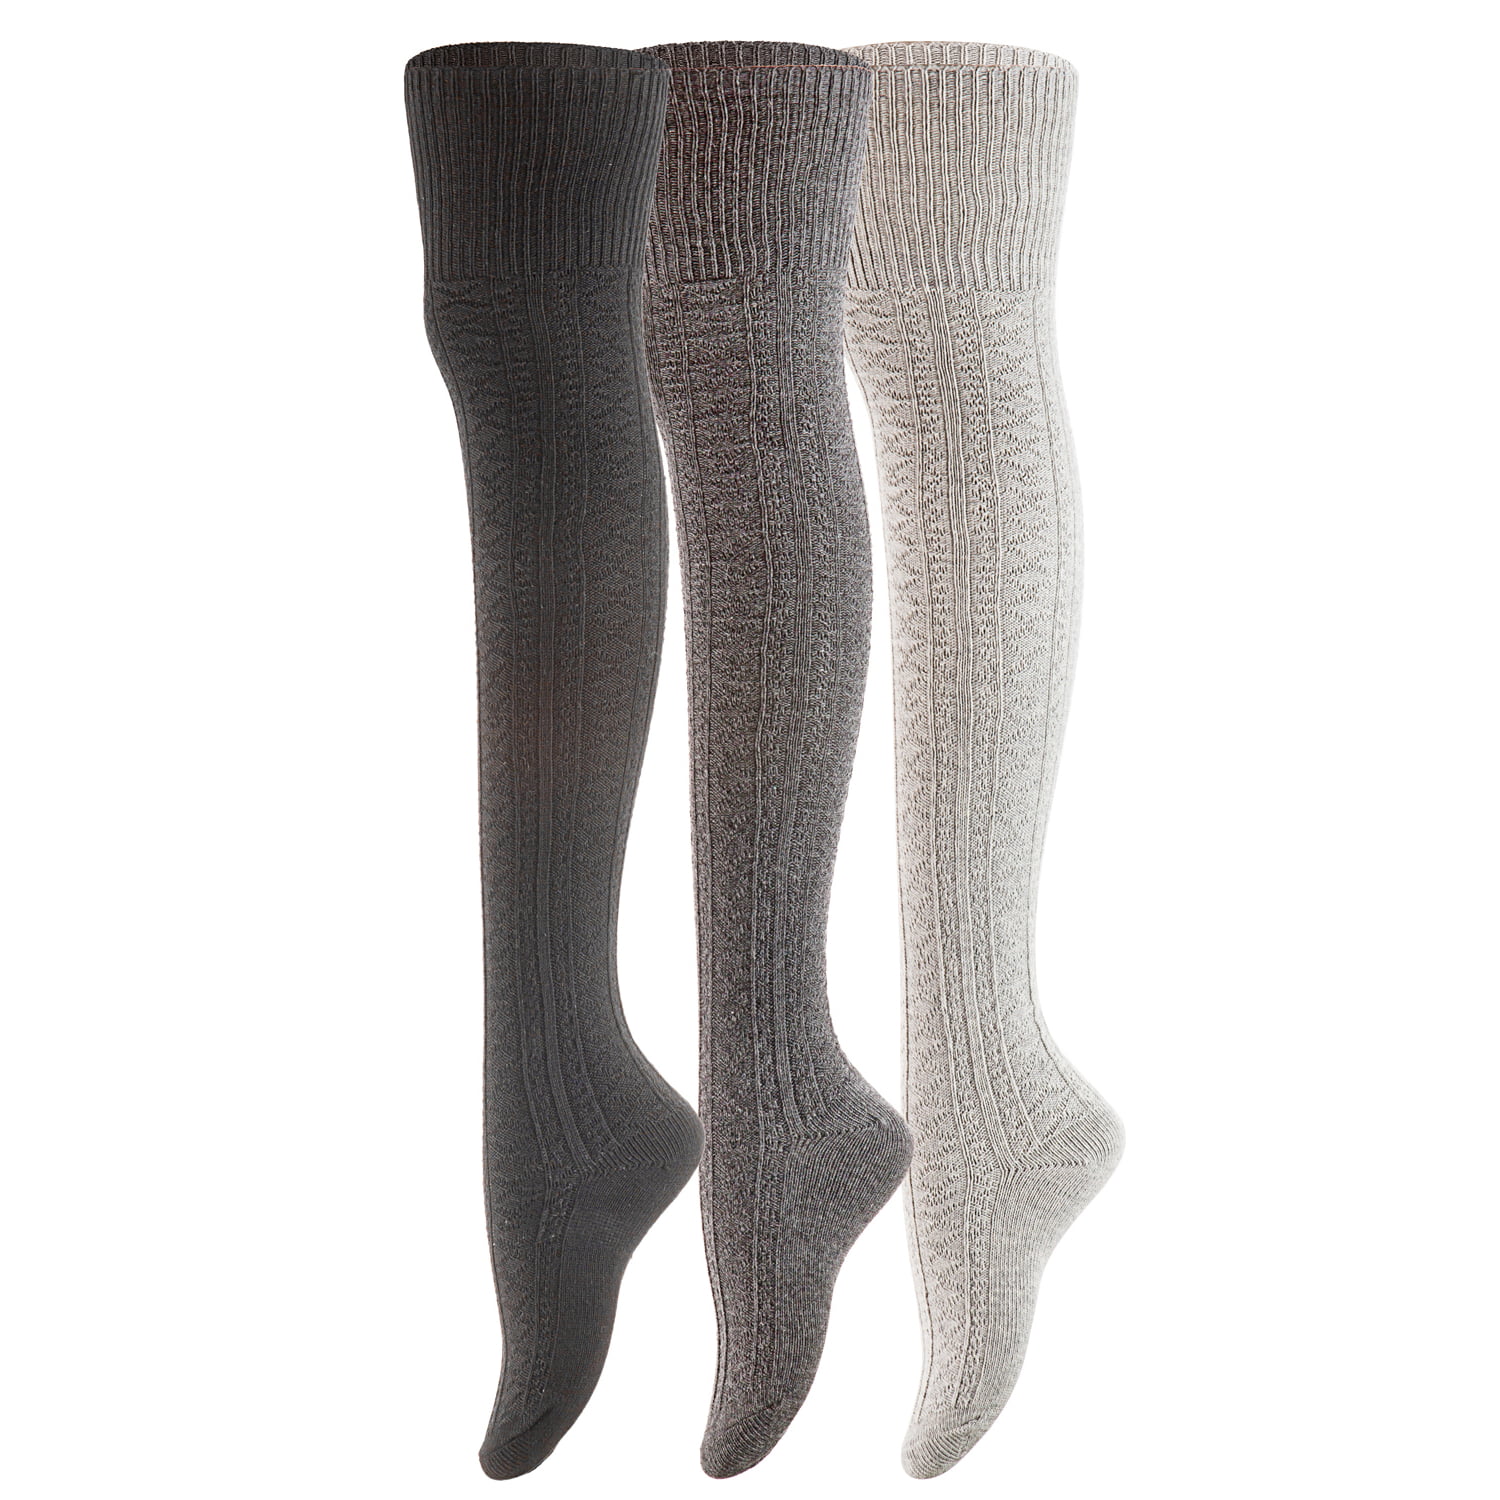 Incredible Women's 3 Pairs Thigh High Cotton Socks Unique, Durable And ...